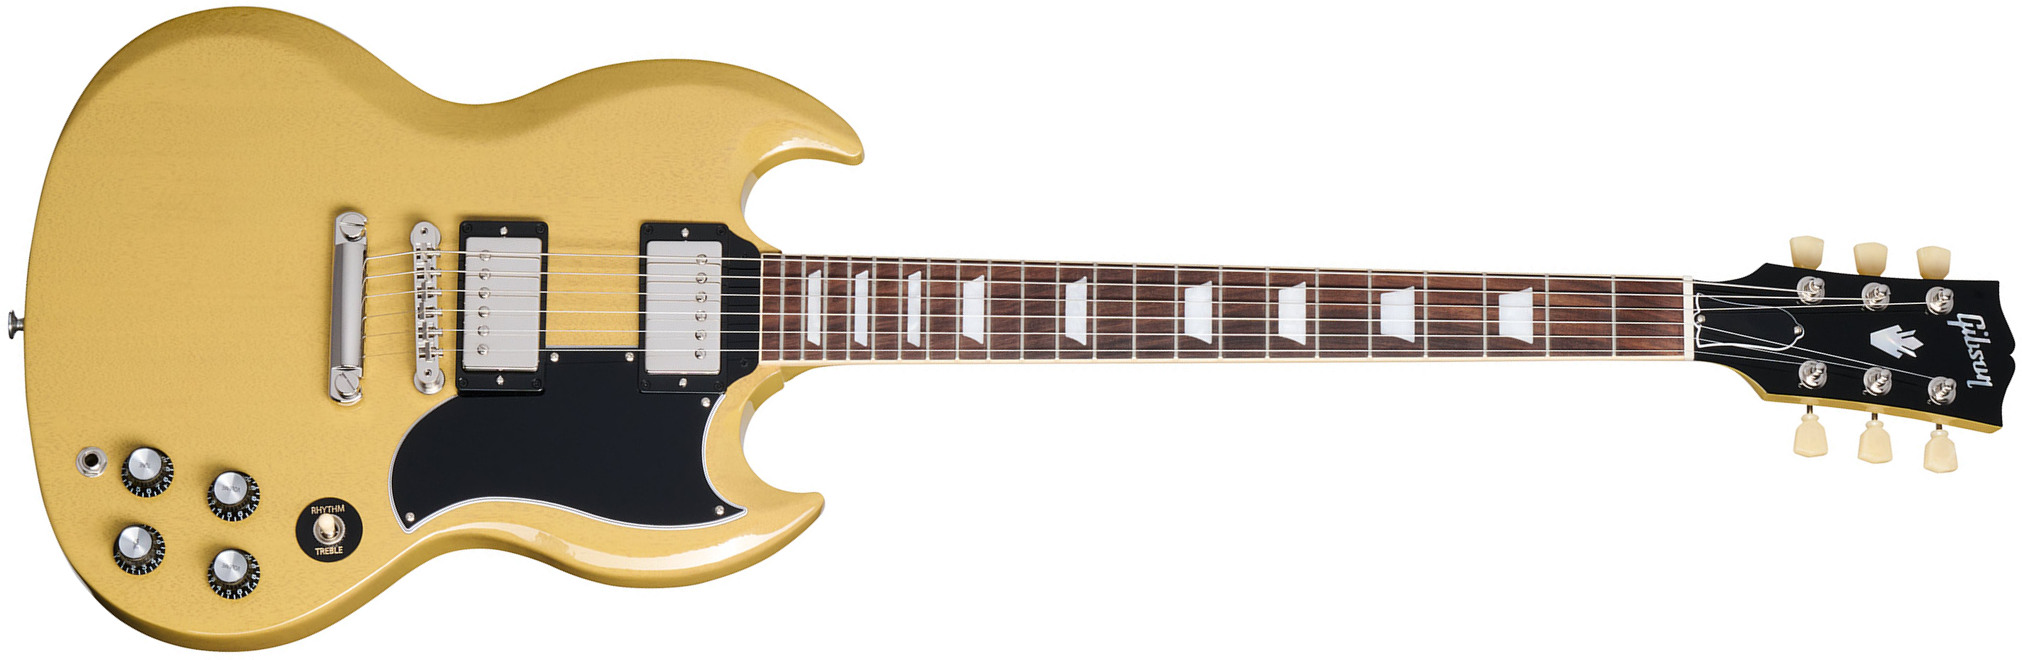 Gibson Sg Standard 1961 Custom Color 2h Ht Rw - Tv Yellow - Double cut electric guitar - Main picture